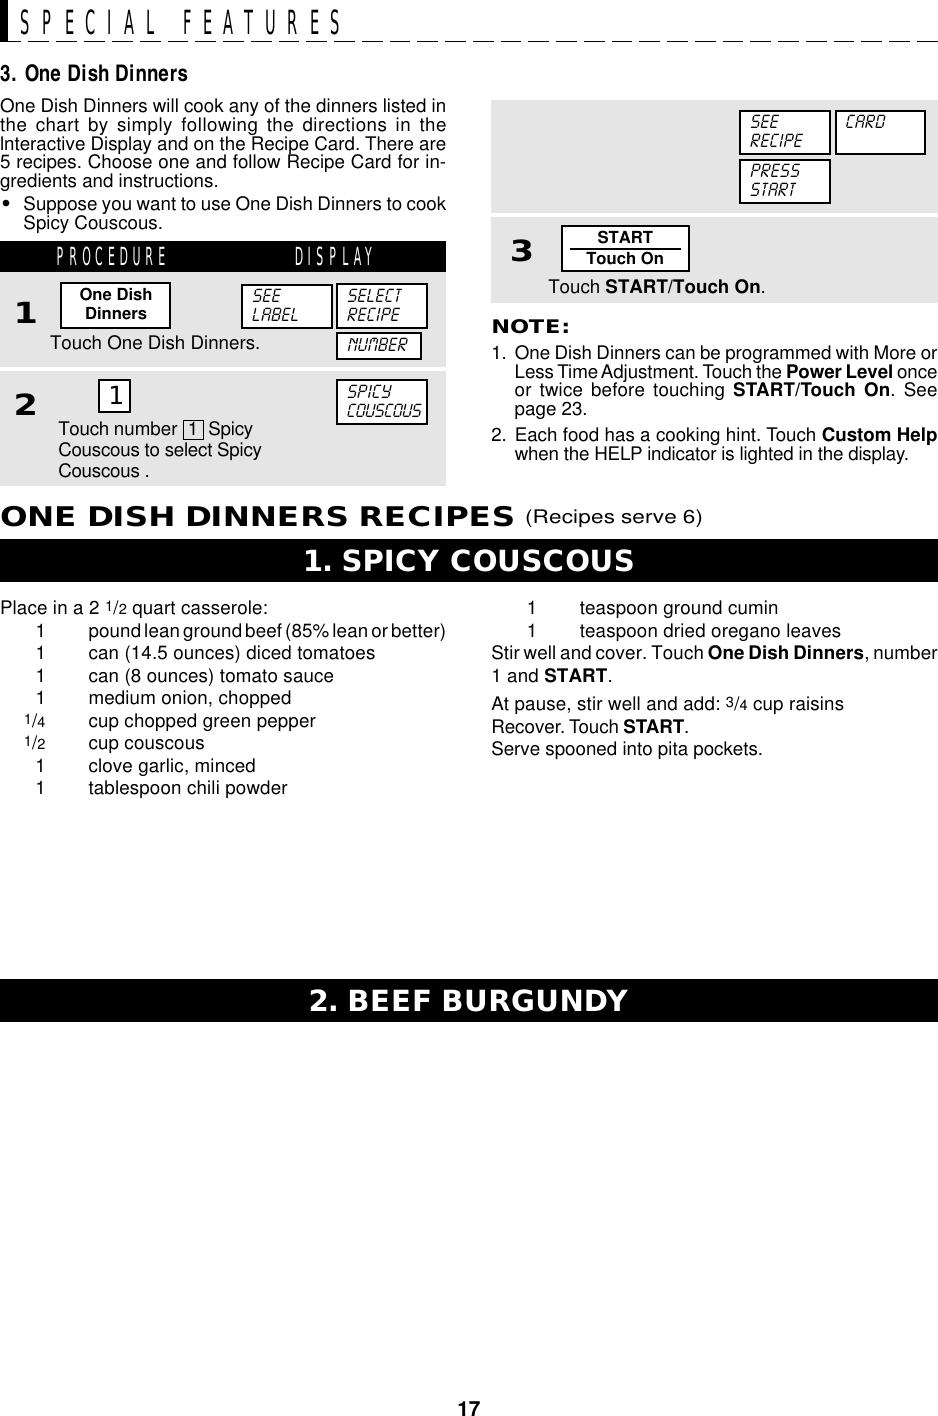 17STARTTouch OnSPECIAL FEATURESOne Dish Dinners will cook any of the dinners listed inthe chart by simply following the directions in thelnteractive Display and on the Recipe Card. There are5 recipes. Choose one and follow Recipe Card for in-gredients and instructions.•Suppose you want to use One Dish Dinners to cookSpicy Couscous.NOTE:1. One Dish Dinners can be programmed with More orLess Time Adjustment. Touch the Power Level onceor twice before touching START/Touch On. Seepage 23.2. Each food has a cooking hint. Touch Custom Helpwhen the HELP indicator is lighted in the display.3. One Dish Dinners3Touch START/Touch On.PRESSSTARTSEERECIPECARDPlace in a 2 1/2 quart casserole:1 pound lean ground beef (85% lean or better)1 can (14.5 ounces) diced tomatoes1 can (8 ounces) tomato sauce1 medium onion, chopped1/4cup chopped green pepper1/2cup couscous1 clove garlic, minced1 tablespoon chili powder1. SPICY COUSCOUS2. BEEF BURGUNDYPROCEDURE DISPLAY1Touch One Dish Dinners.One DishDinners2SPICYCOUSCOUSSEELABELSELECTRECIPEONE DISH DINNERS RECIPES (Recipes serve 6)NUMBER1Touch number  1  SpicyCouscous to select SpicyCouscous .1 teaspoon ground cumin1 teaspoon dried oregano leavesStir well and cover. Touch One Dish Dinners, number1 and START.At pause, stir well and add: 3/4 cup raisinsRecover. Touch START.Serve spooned into pita pockets.